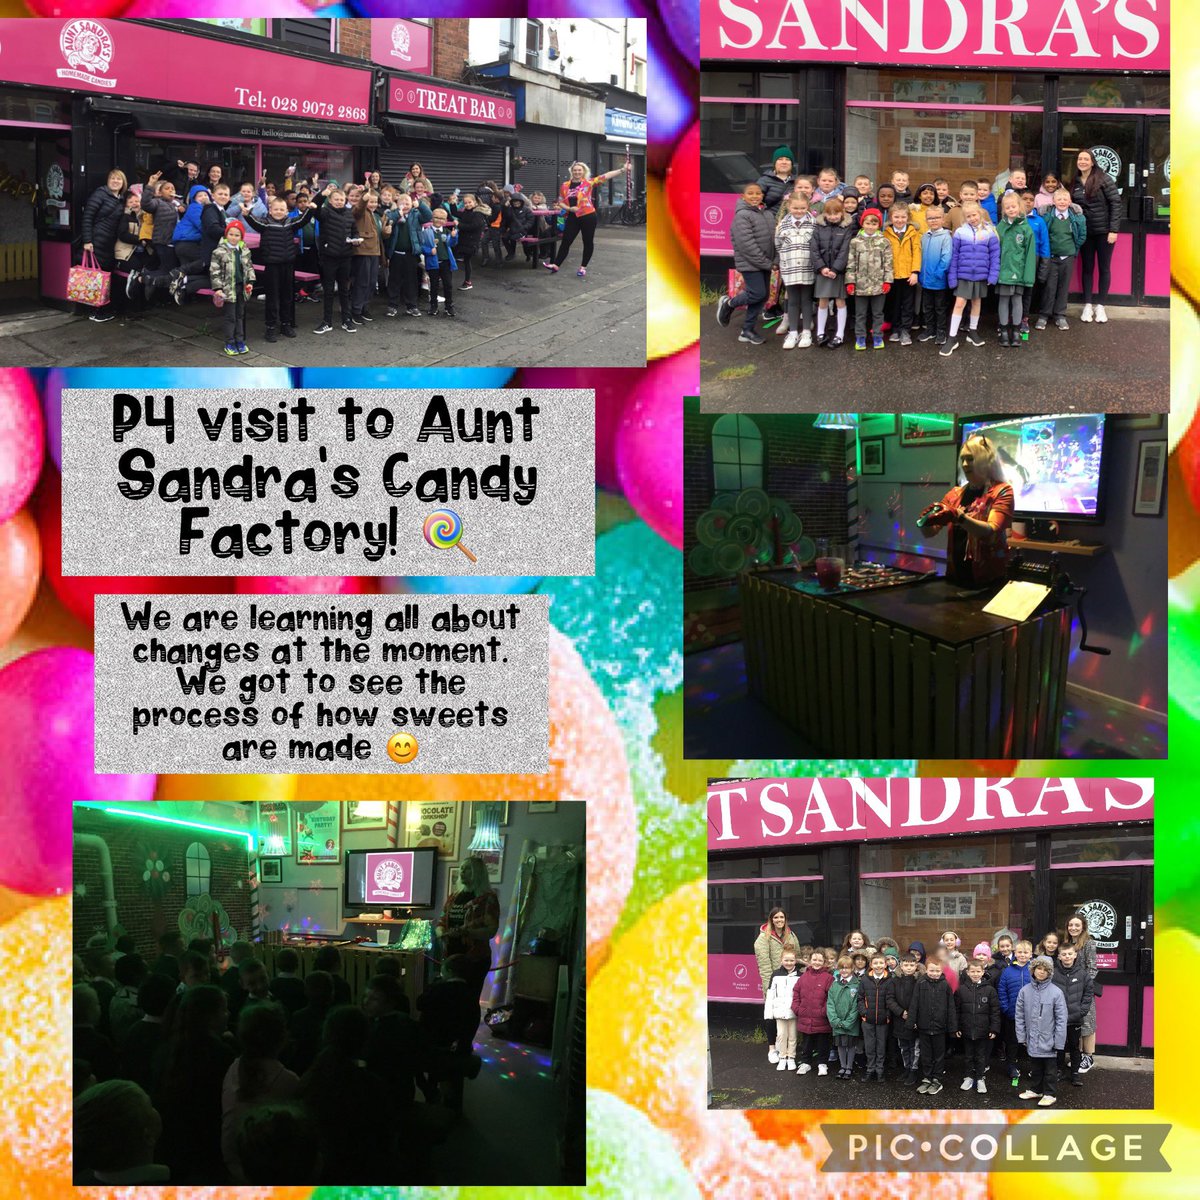 P4 had a brilliant day today at Aunt Sandra’s Candy Factory! Thank you to Chocolatey Claire for an amazing candy show 🤩